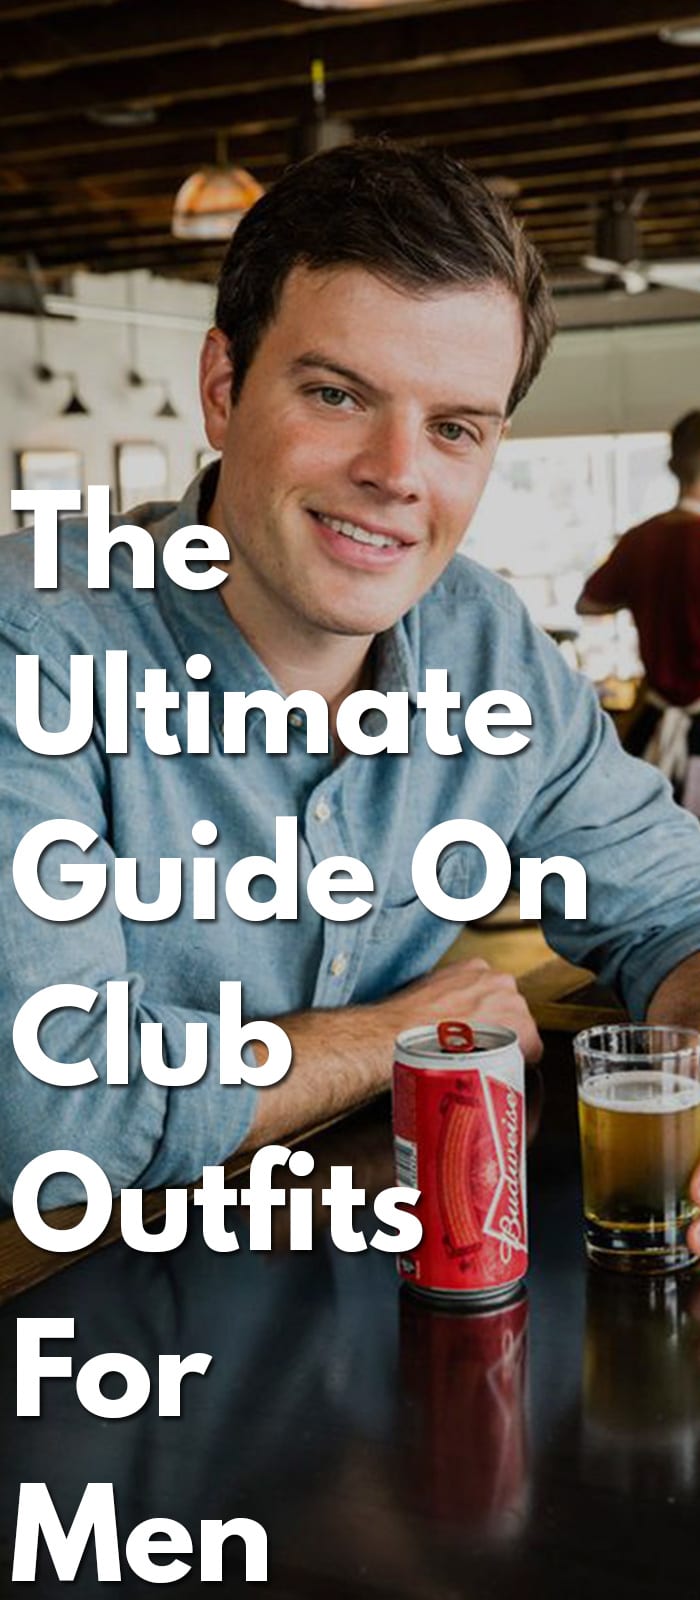 The-Ultimate-Guide-On-Club-Outfits-For-Men